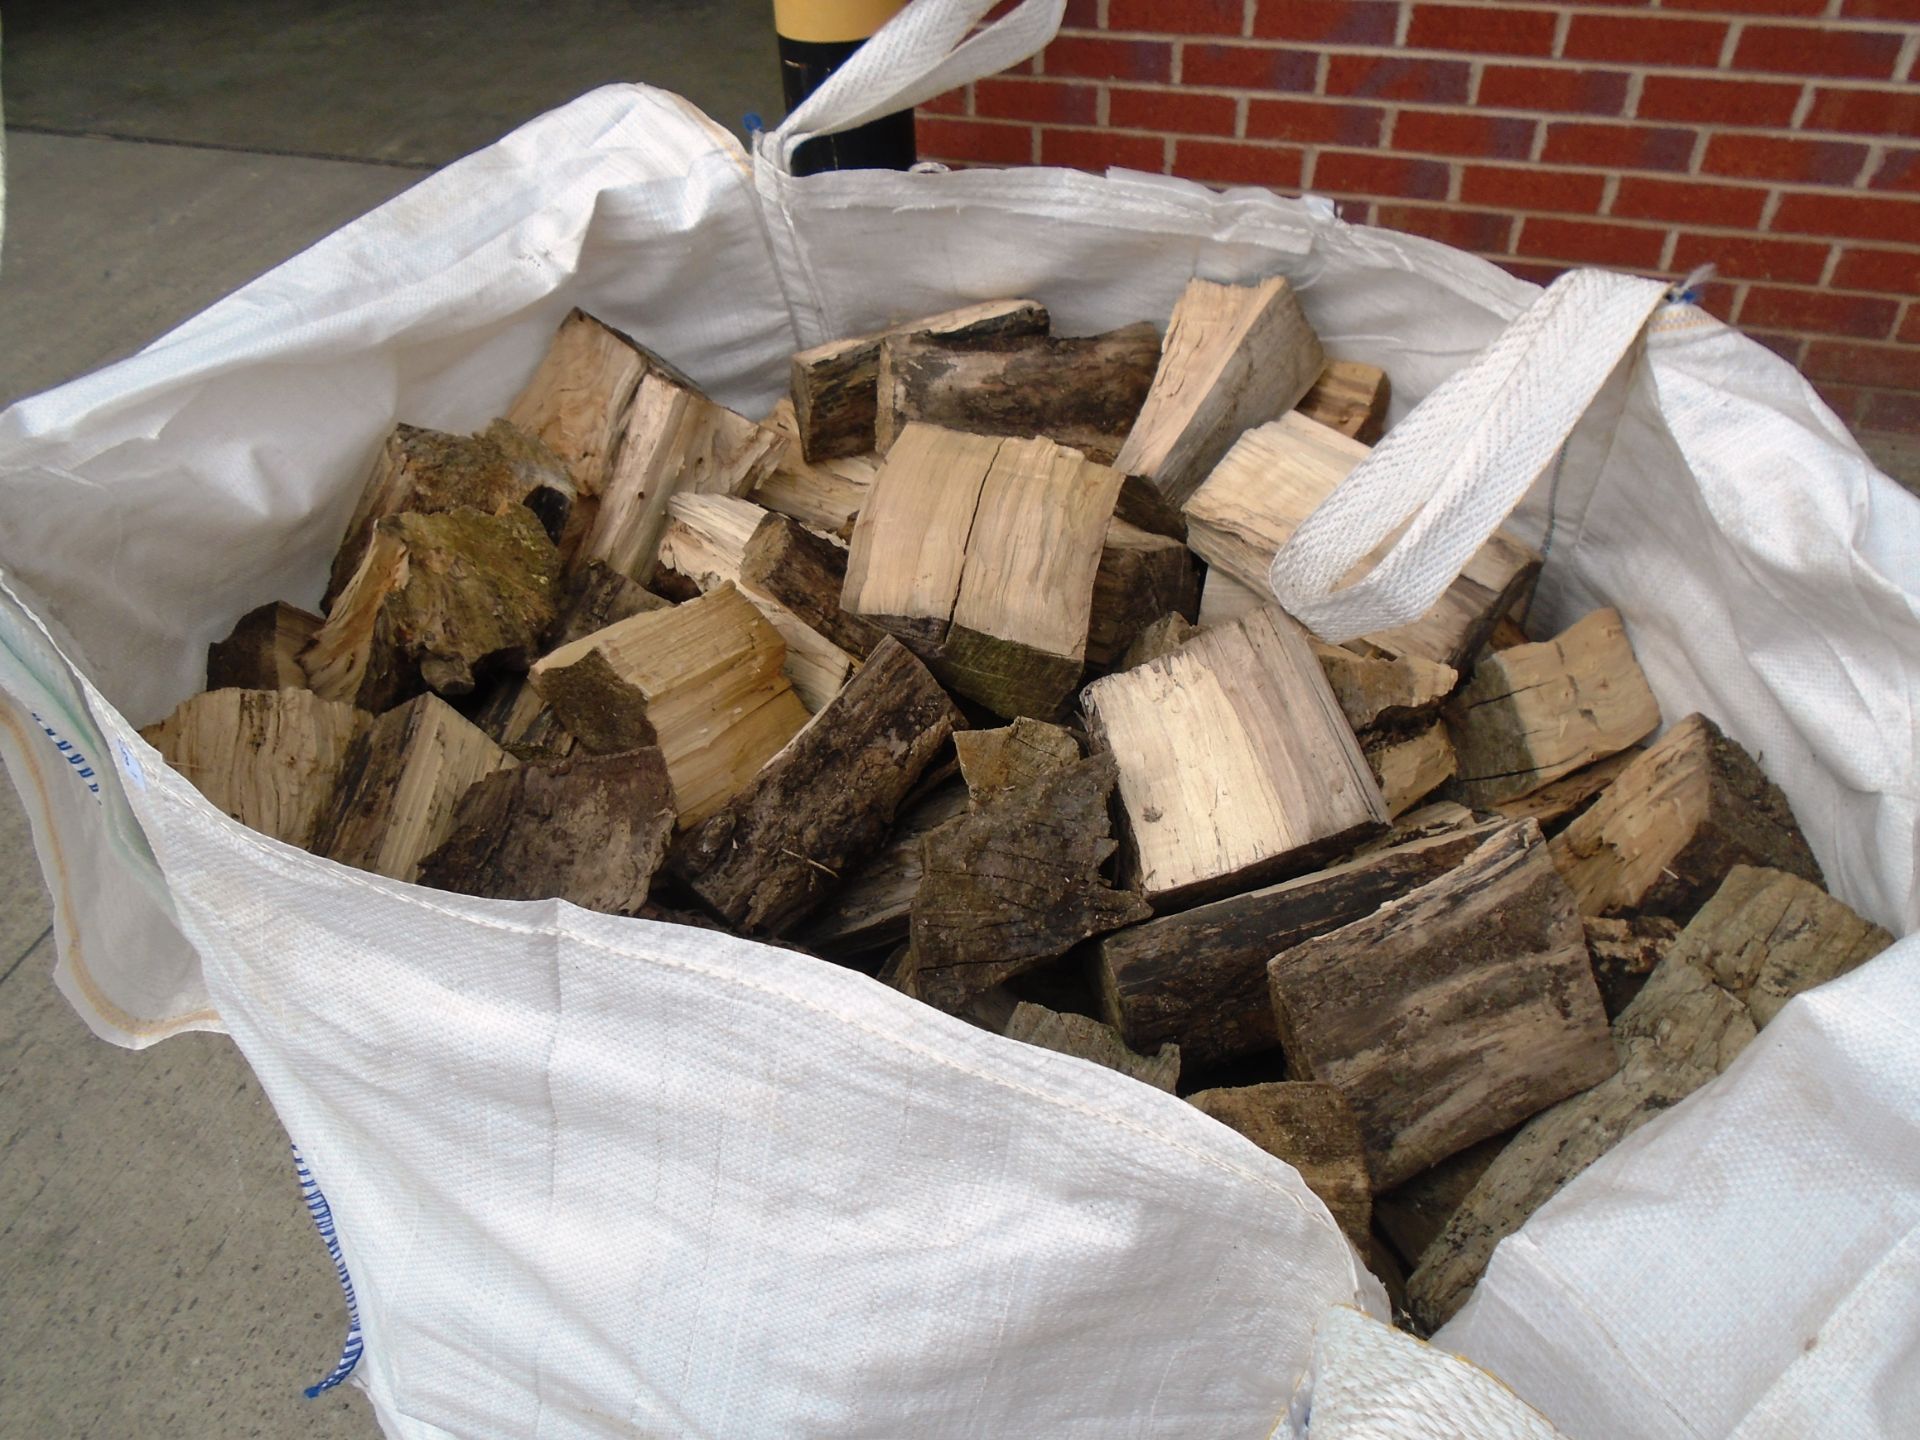 Contents to builders sack - quantity of natured extra dry logs